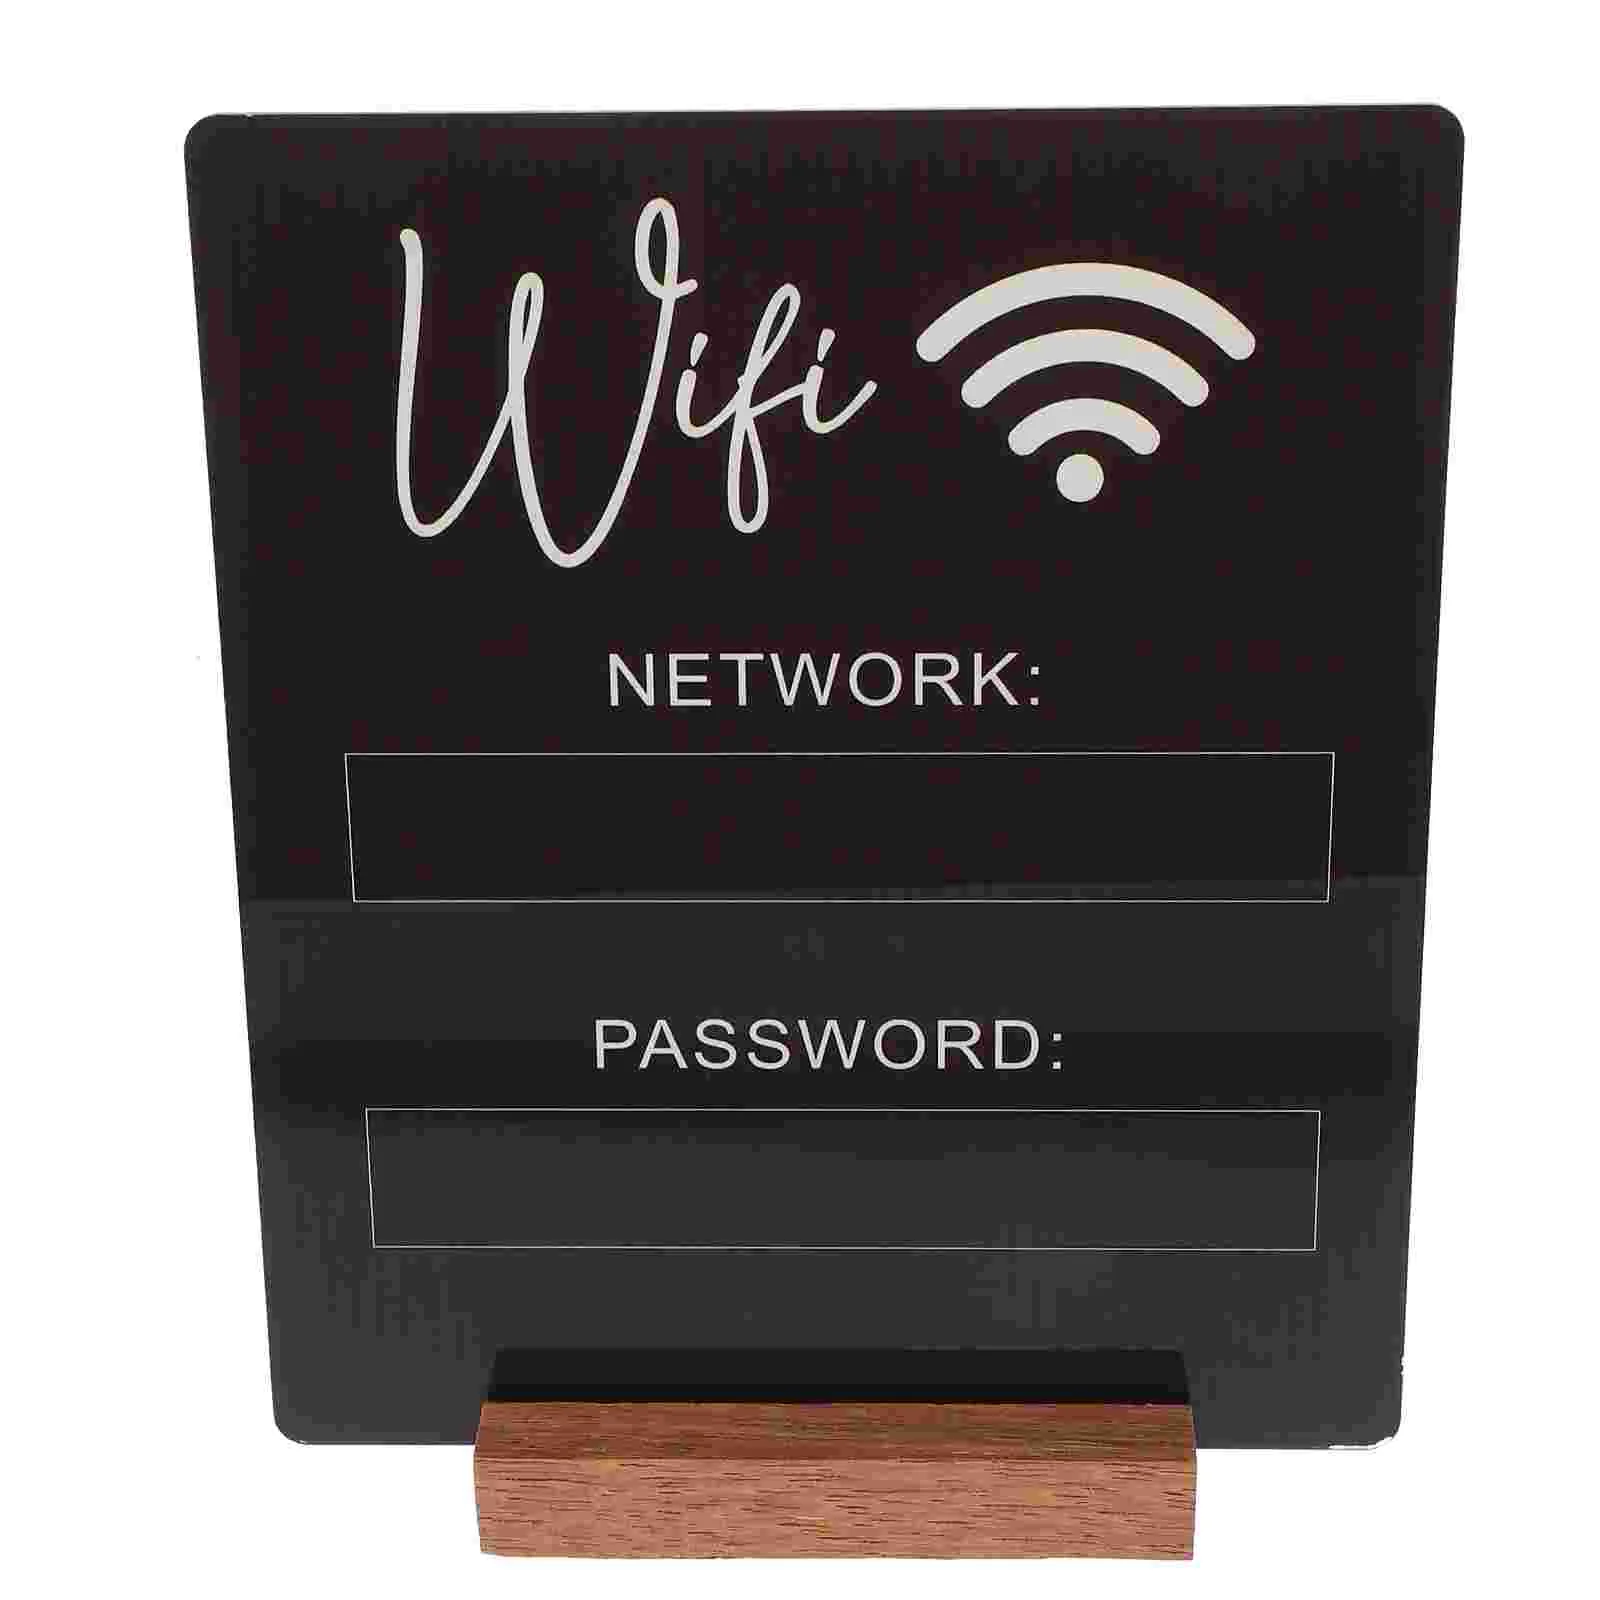 wifi sign 3d acrylic mirror wall stickers rewritable account and password for public shope wifi signage Wifi Password Sign Wireless Network Table Acrylic Reminder Decor Decorate Hotel for